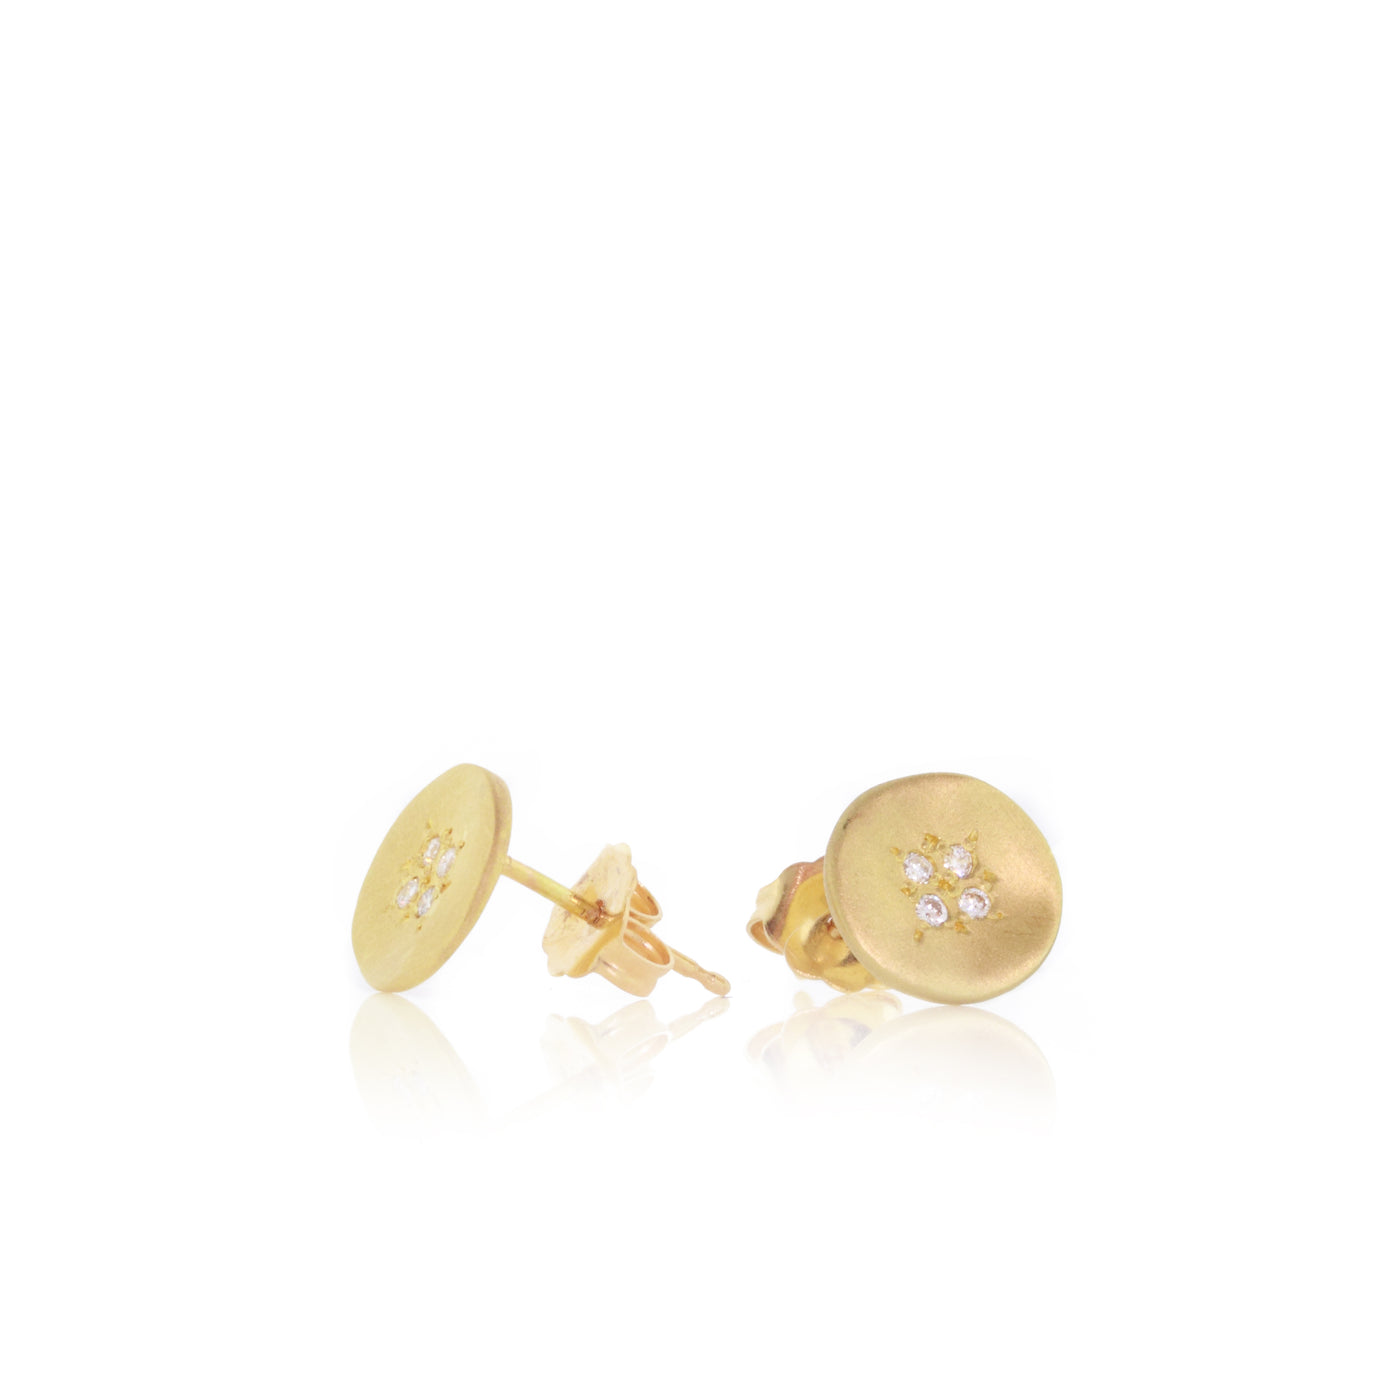 GOLD FOUR STAR WAVE CHARM STUDS